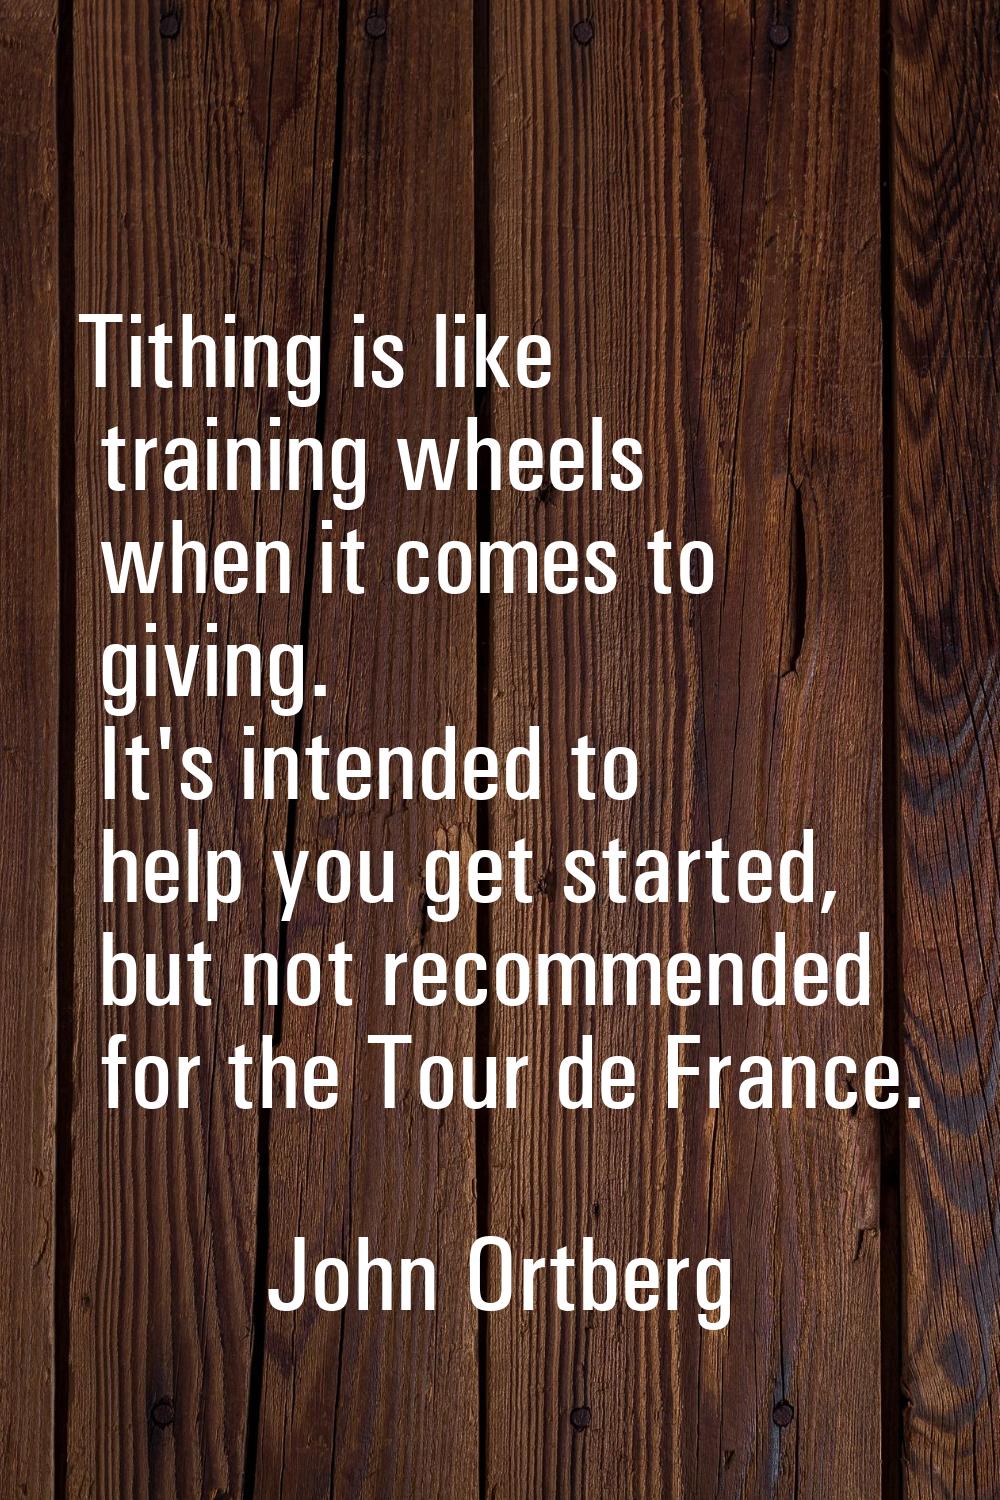 Tithing is like training wheels when it comes to giving. It's intended to help you get started, but